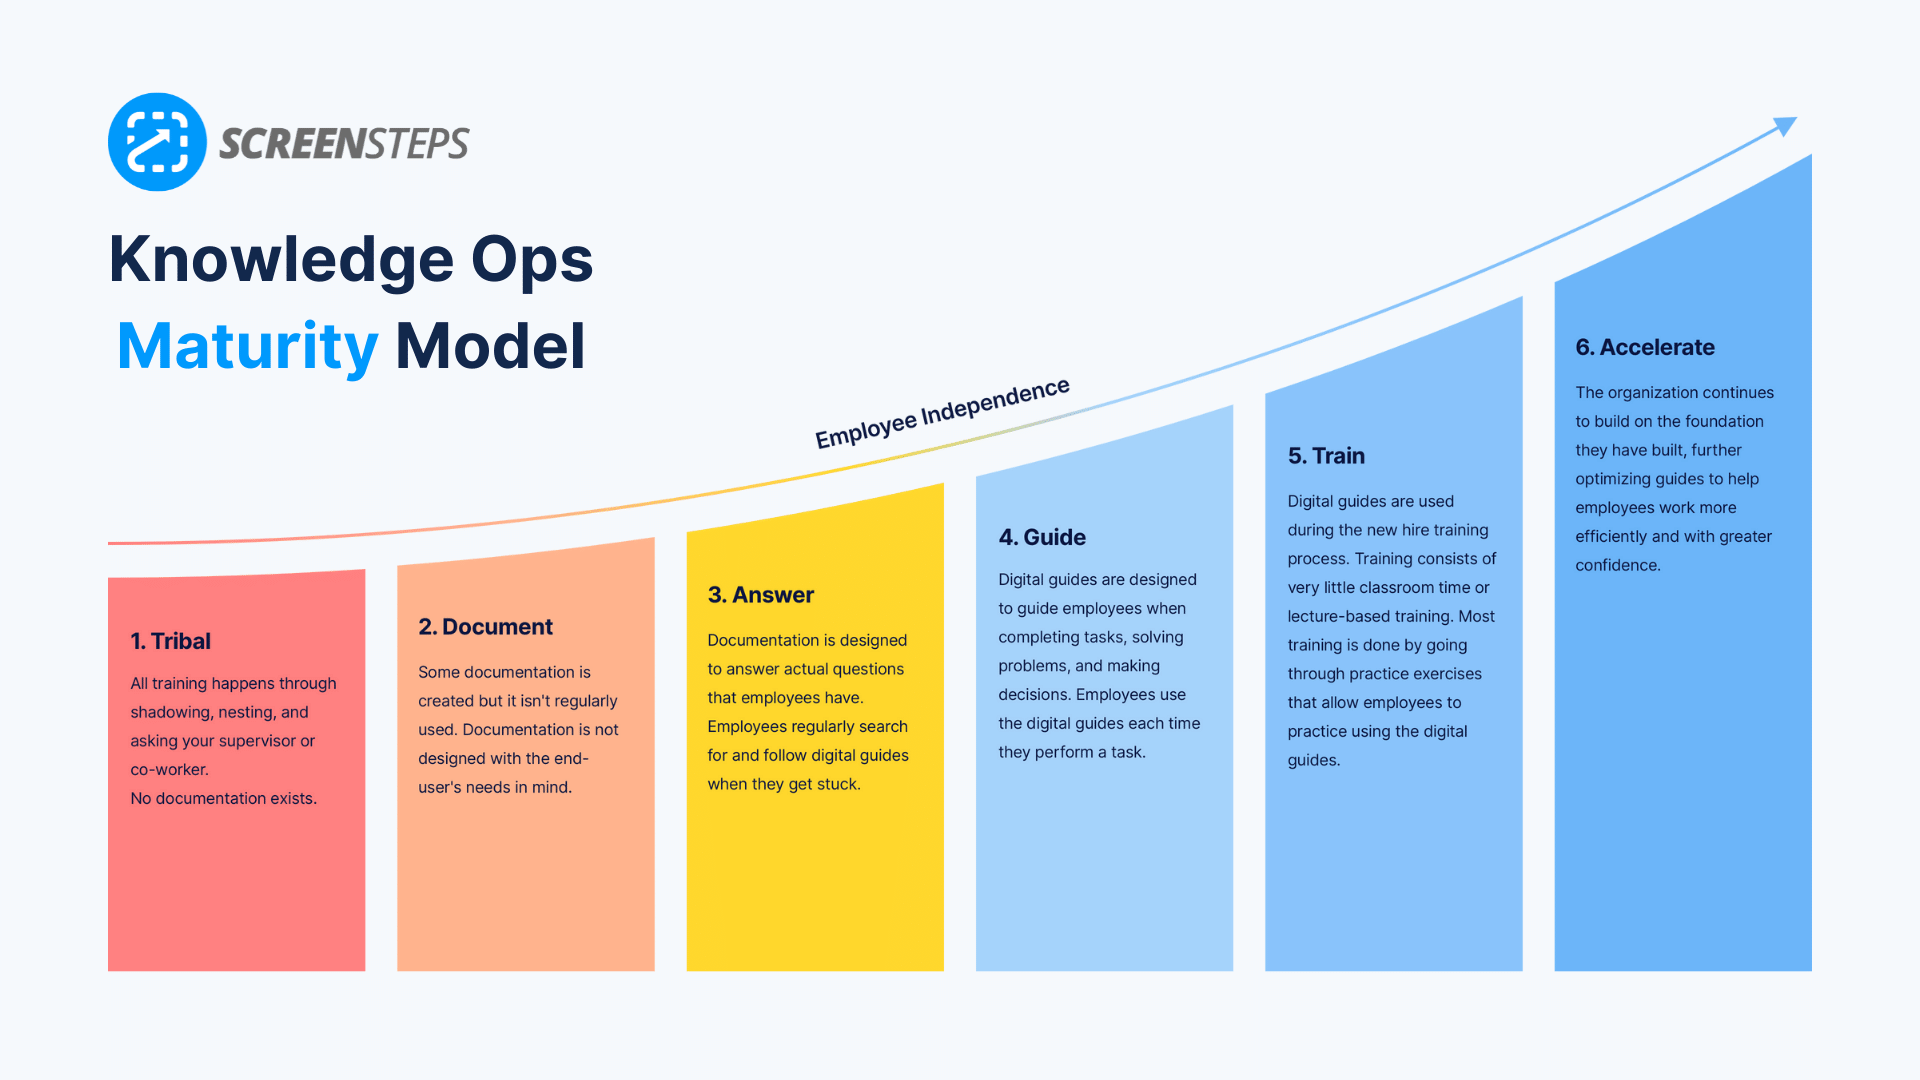 The Knowledge Ops Maturity Model: How Effective Are Your Knowledge Operations?